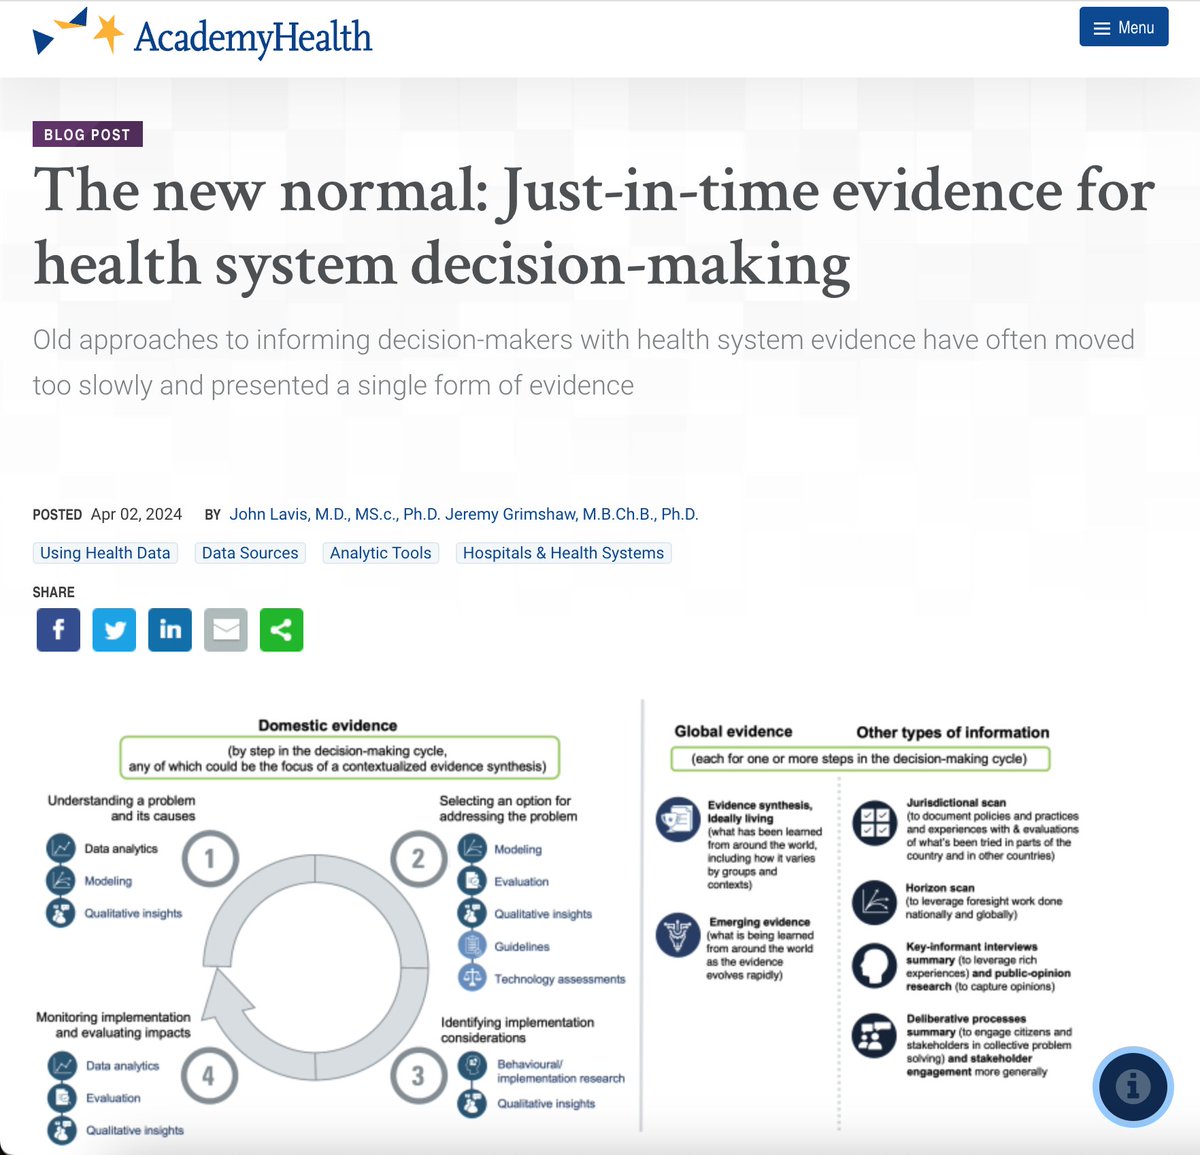 If we want to realize a new normal – just in time evidence for health system decision-making – then we must continue to learn from innovations like rapid evidence support units. Read more in this @AcademyHealth blog post by @lavisjn & @GrimshawJeremy ow.ly/RT1850R8nMn